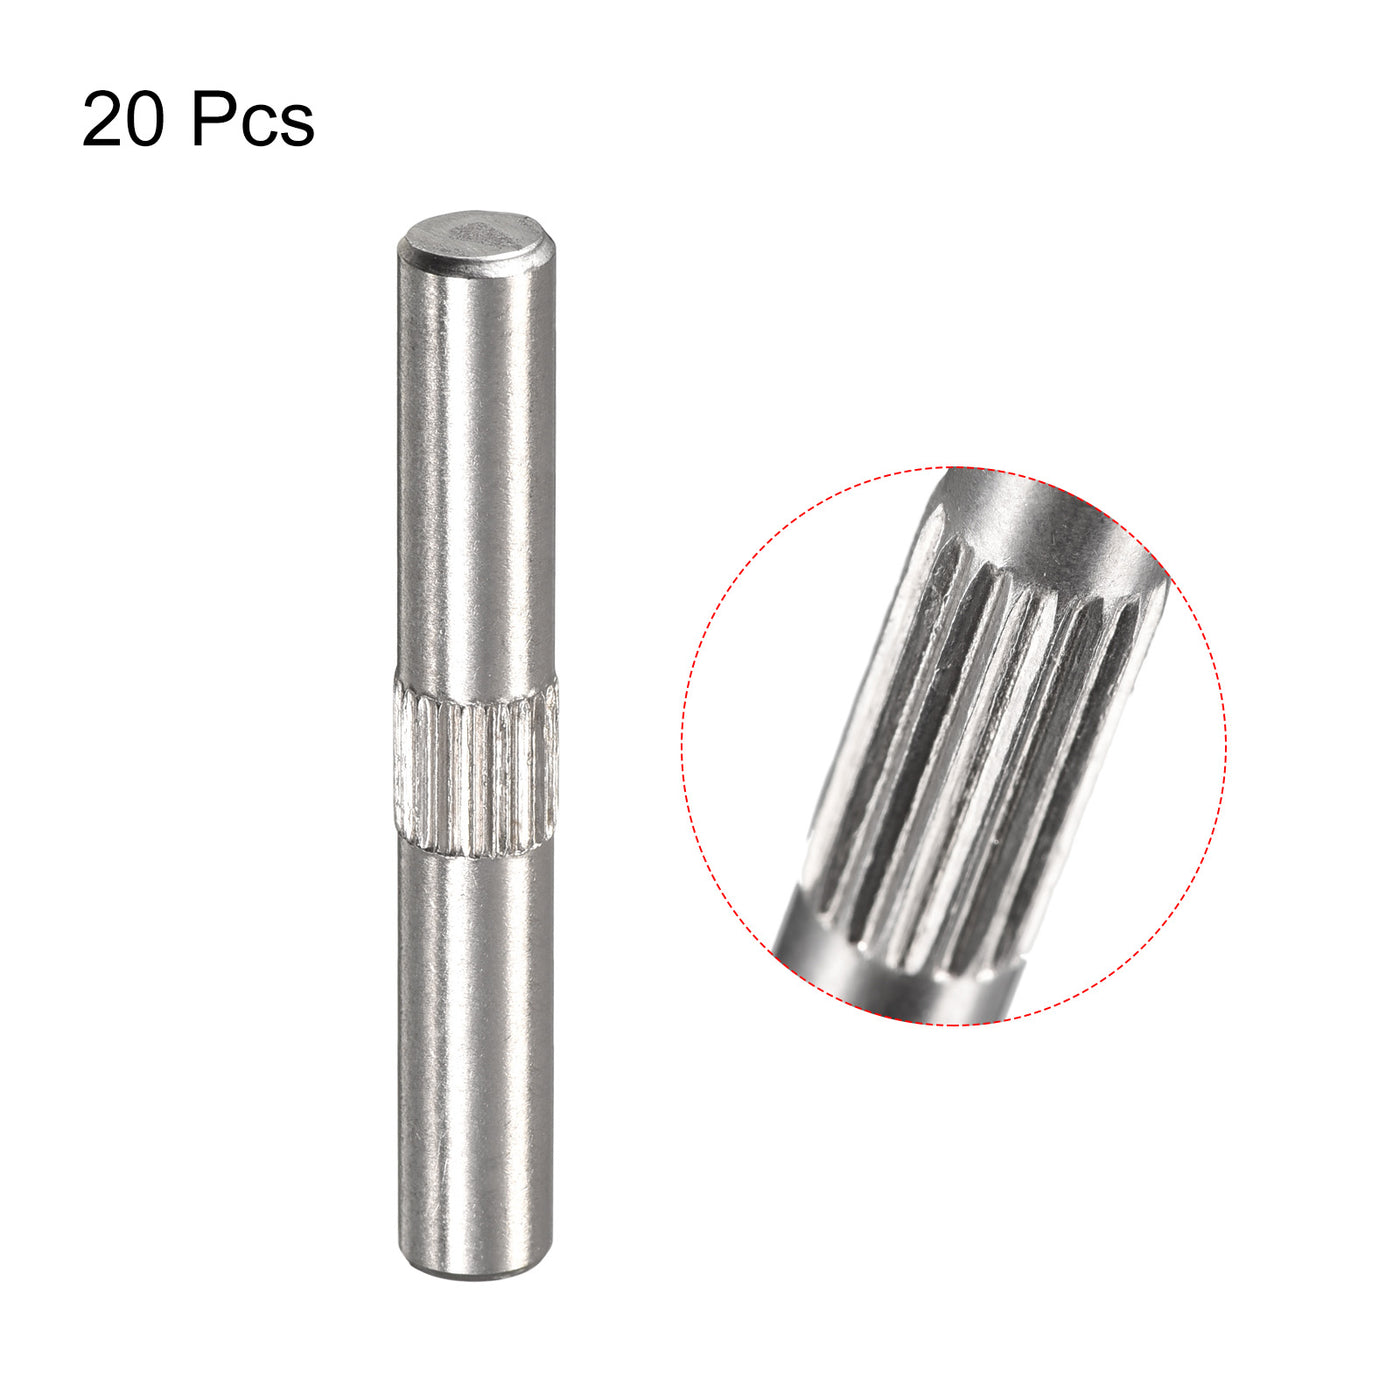 uxcell Uxcell 5x35mm 304 Stainless Steel Dowel Pins, 20Pcs Center Knurled Chamfered End Pin